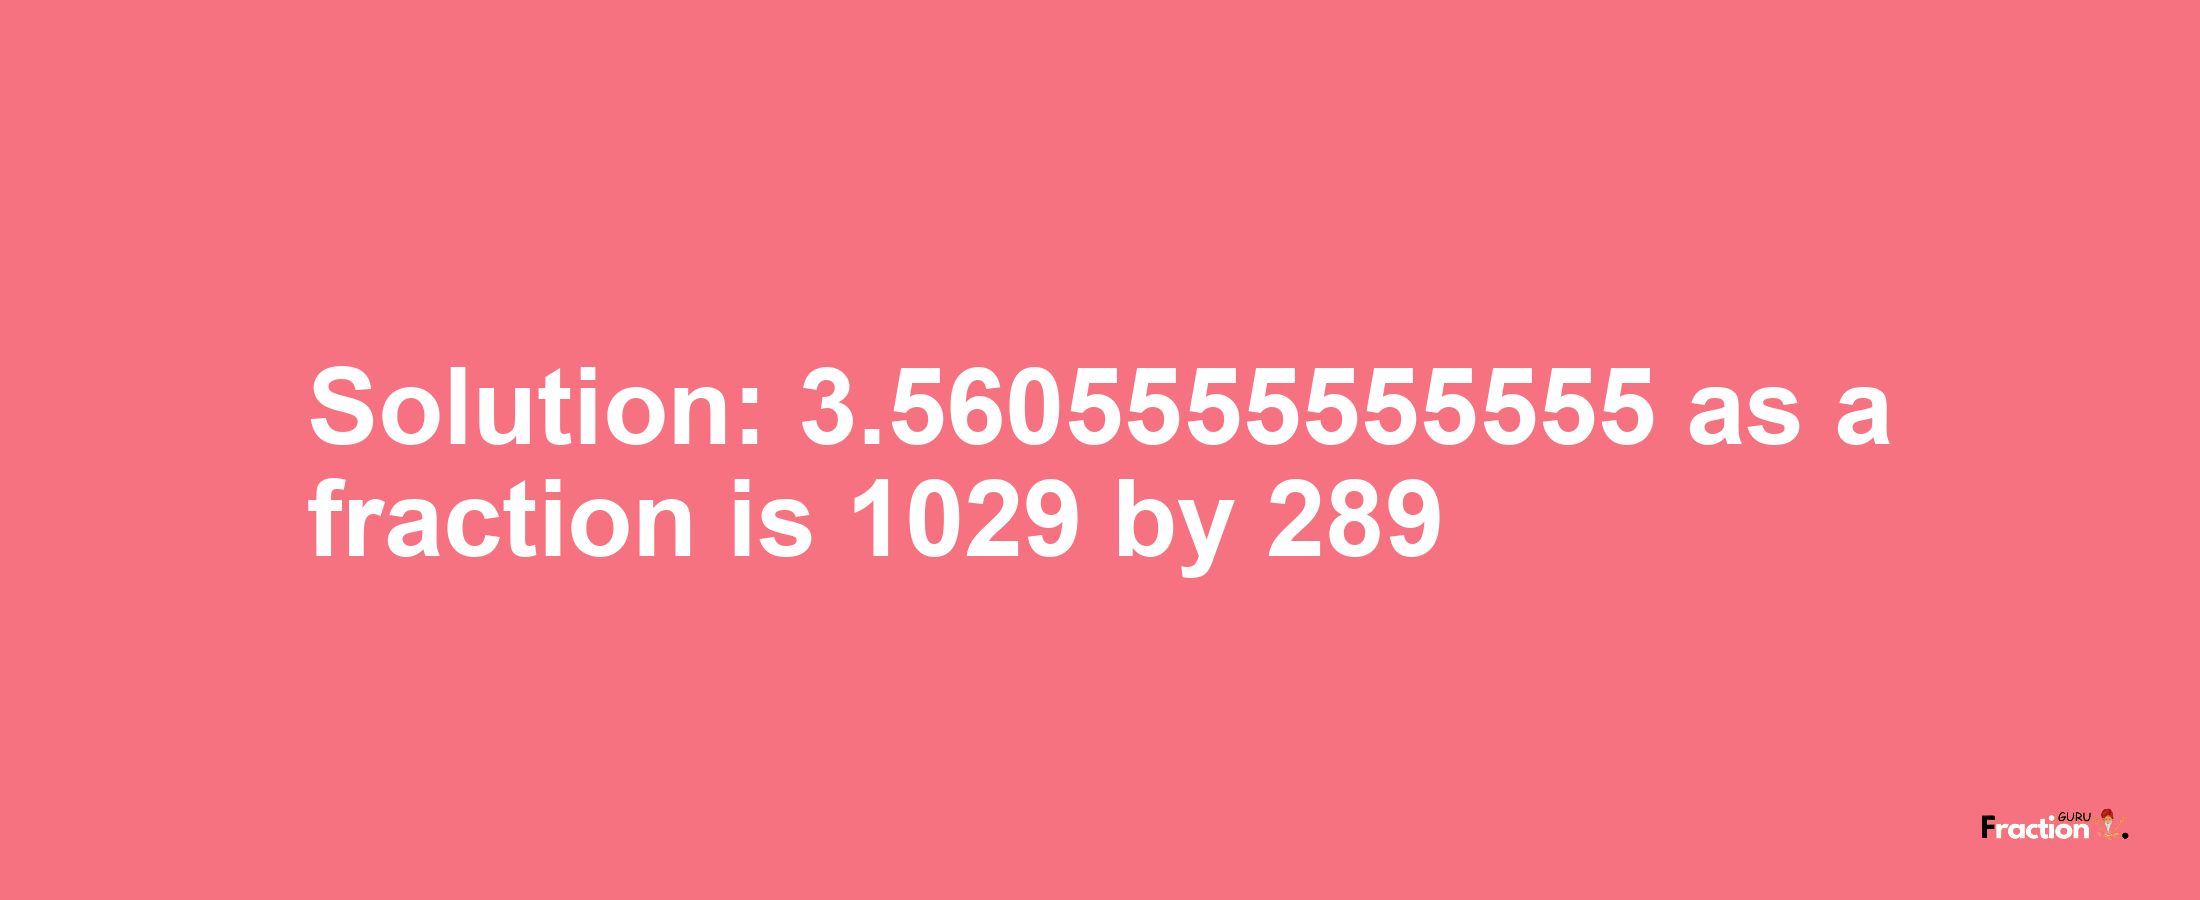 Solution:3.5605555555555 as a fraction is 1029/289